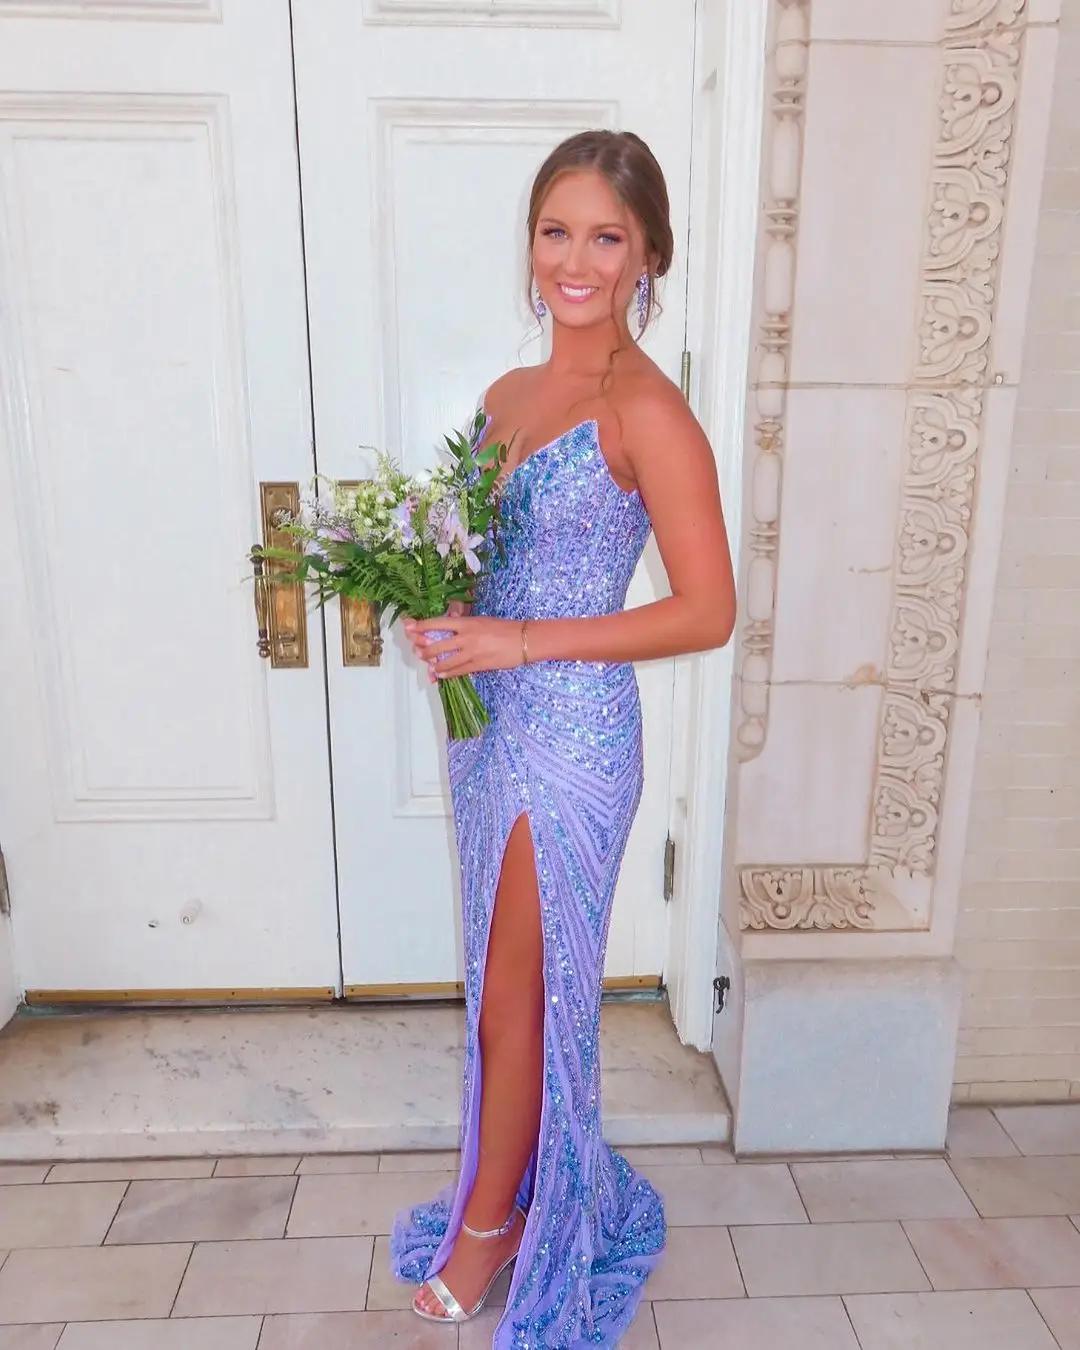 girl at prom in purple dress